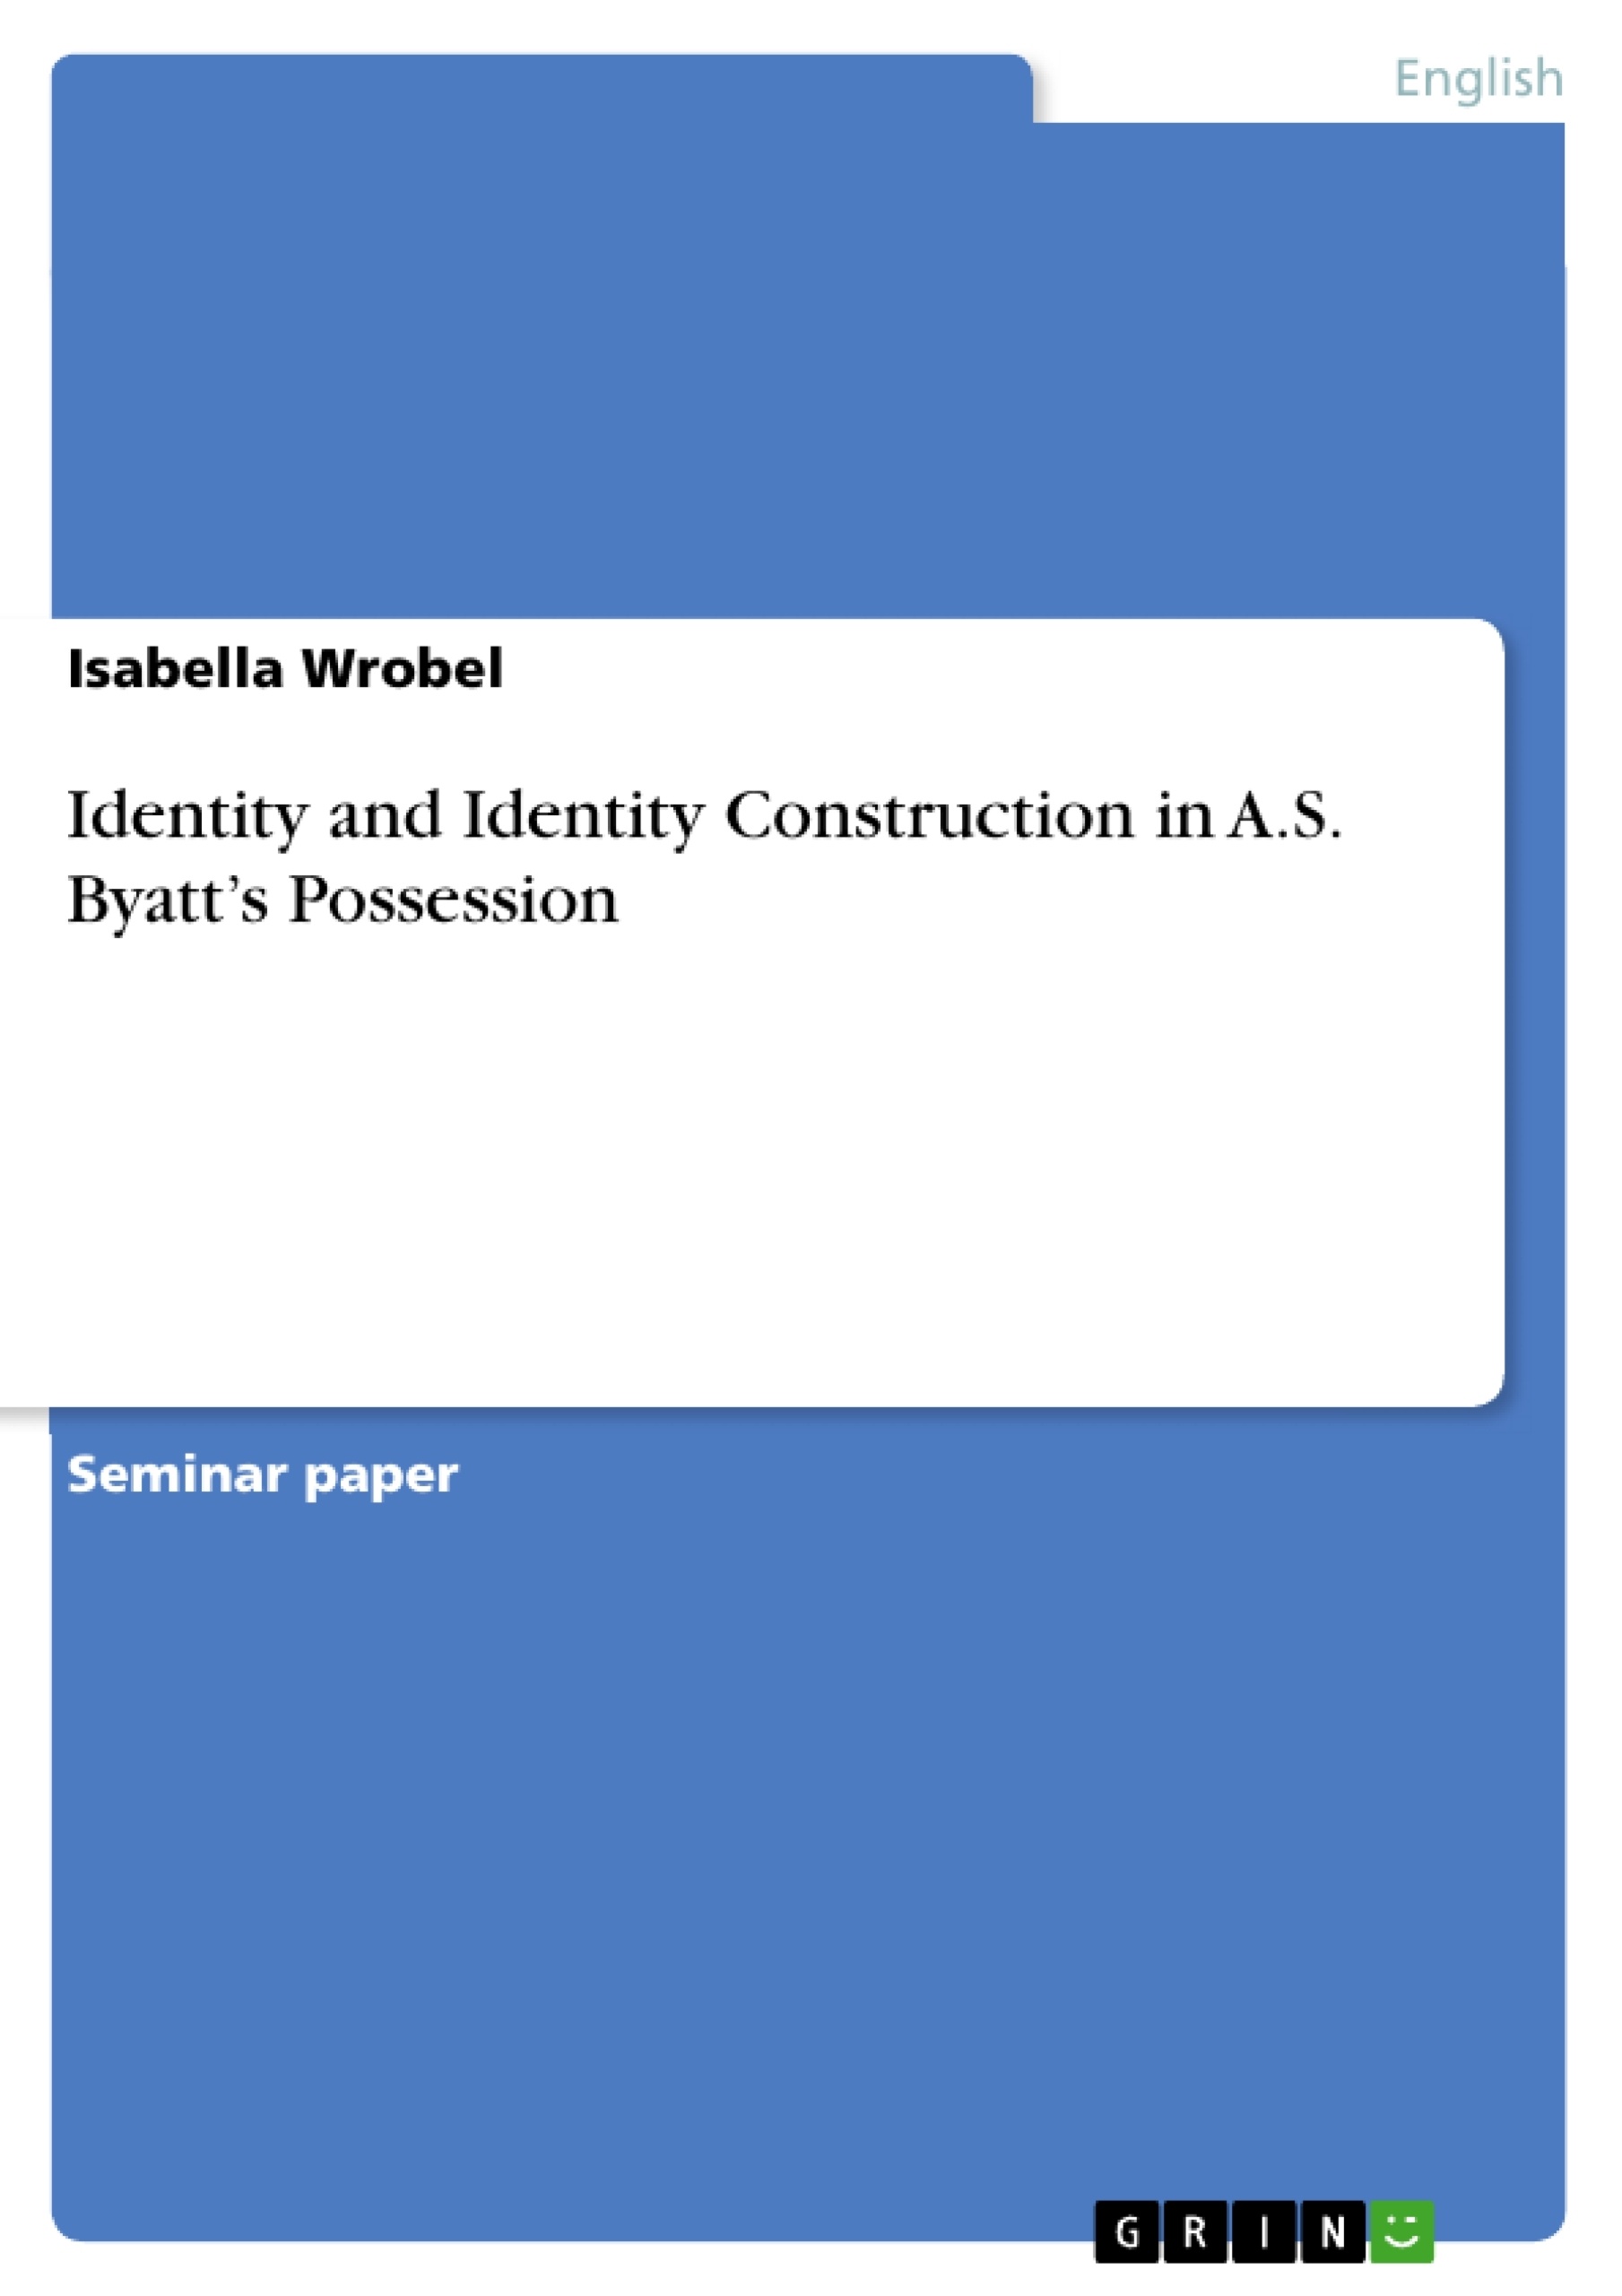 Título: Identity and Identity Construction in A.S. Byatt’s Possession